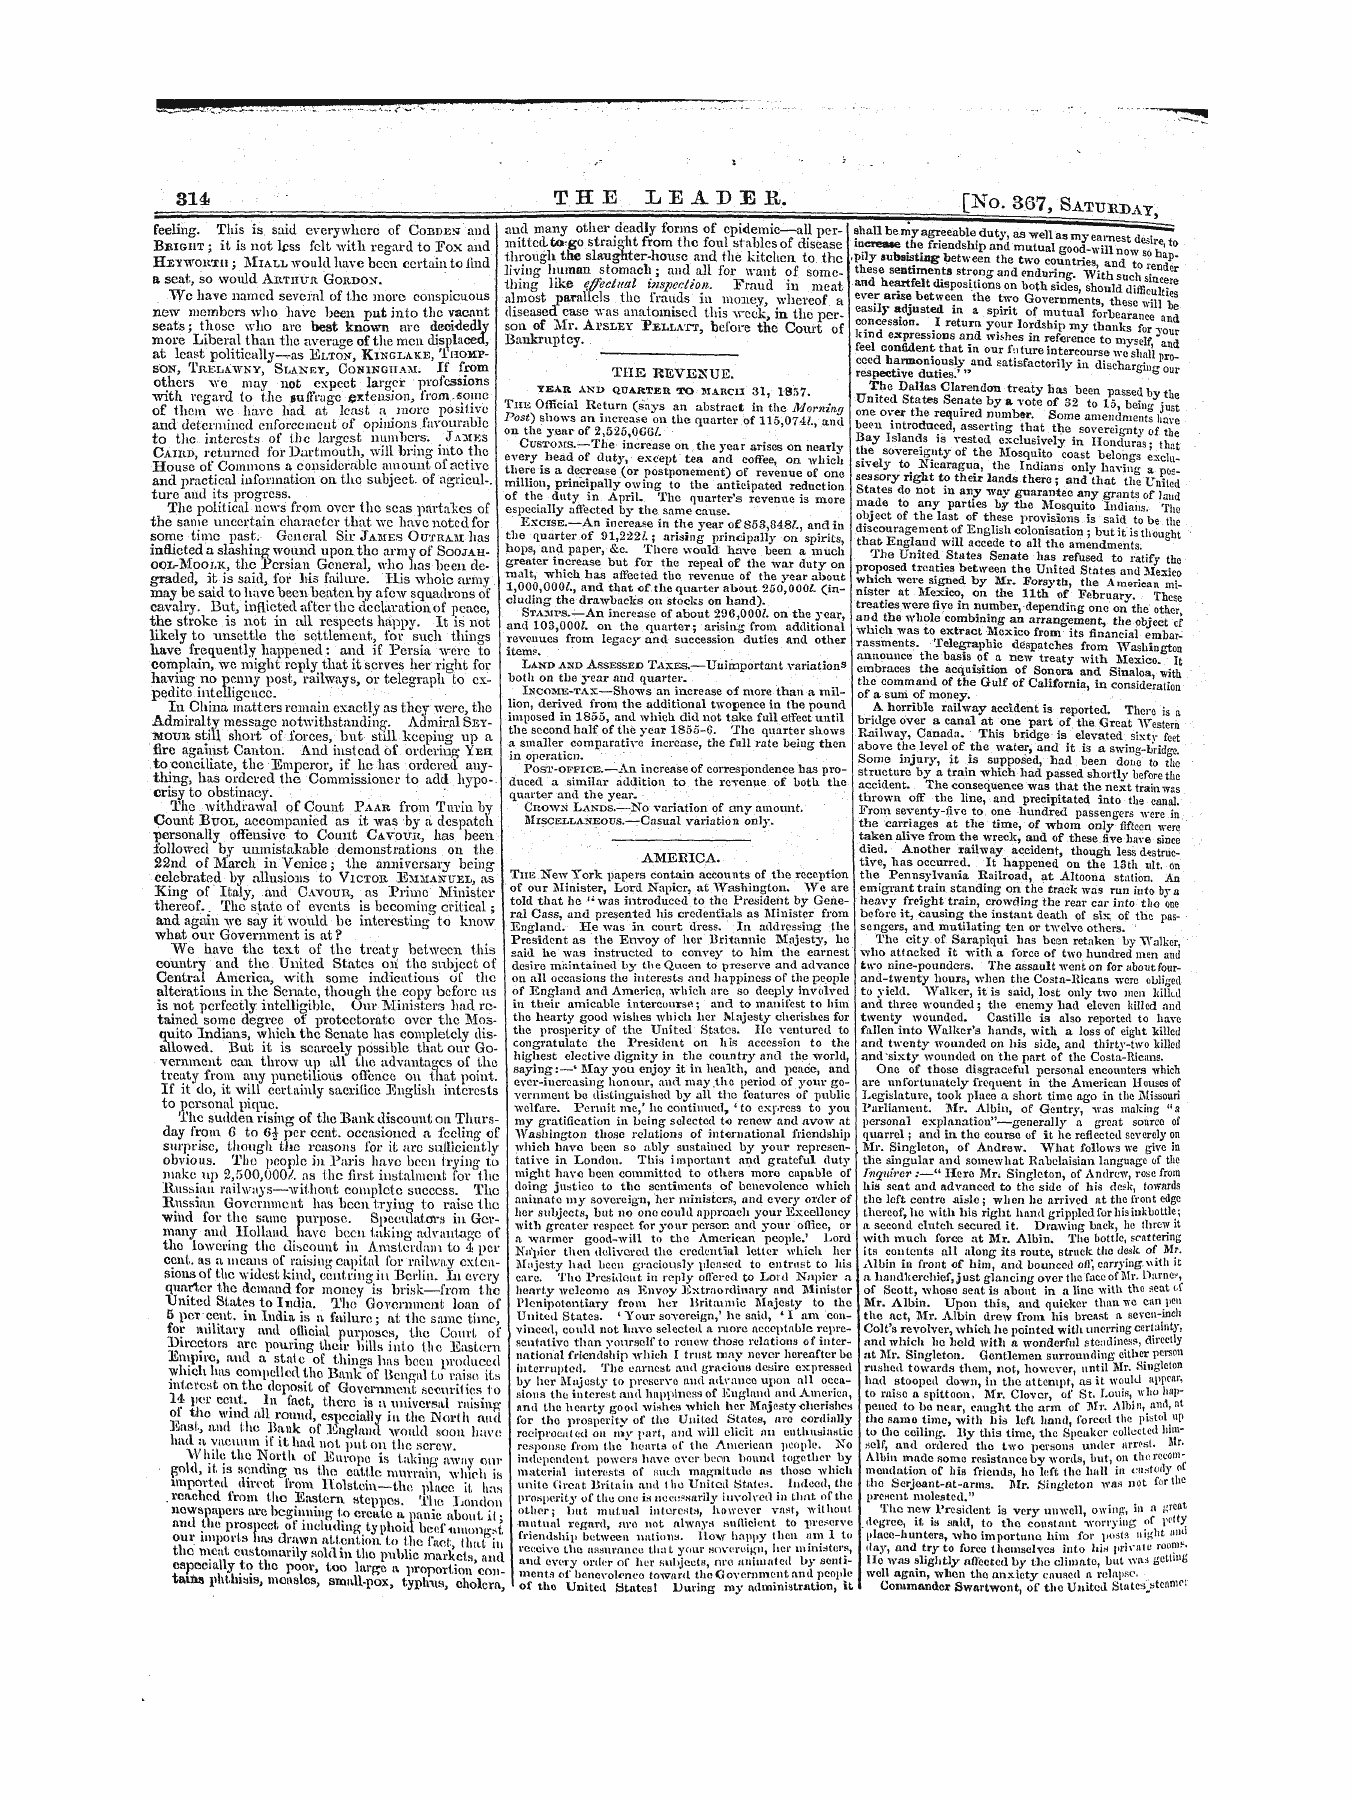 Leader (1850-1860): jS F Y, 1st edition: 2